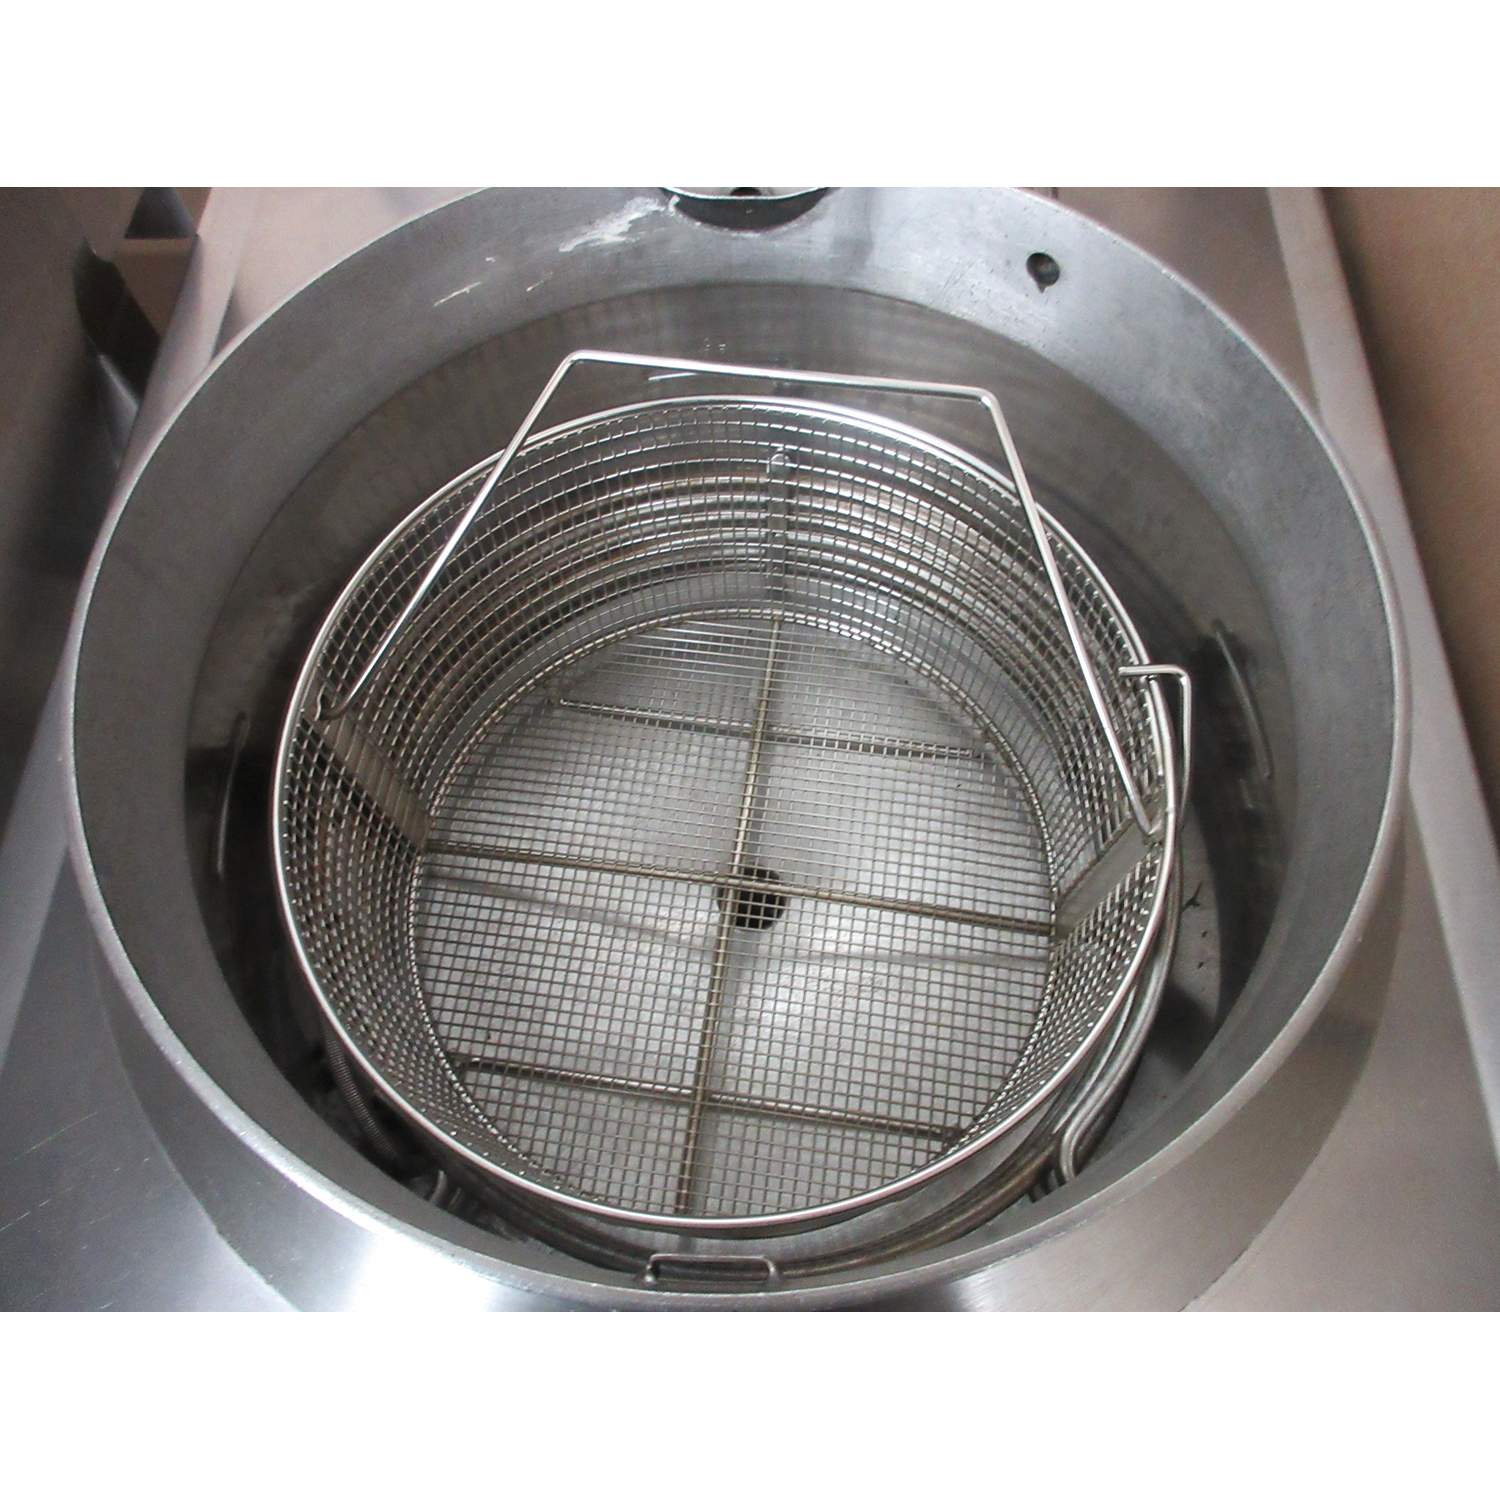 BKI FKM-F Electric Pressure Fryer, With Filtration, Used Excellent Condition image 2